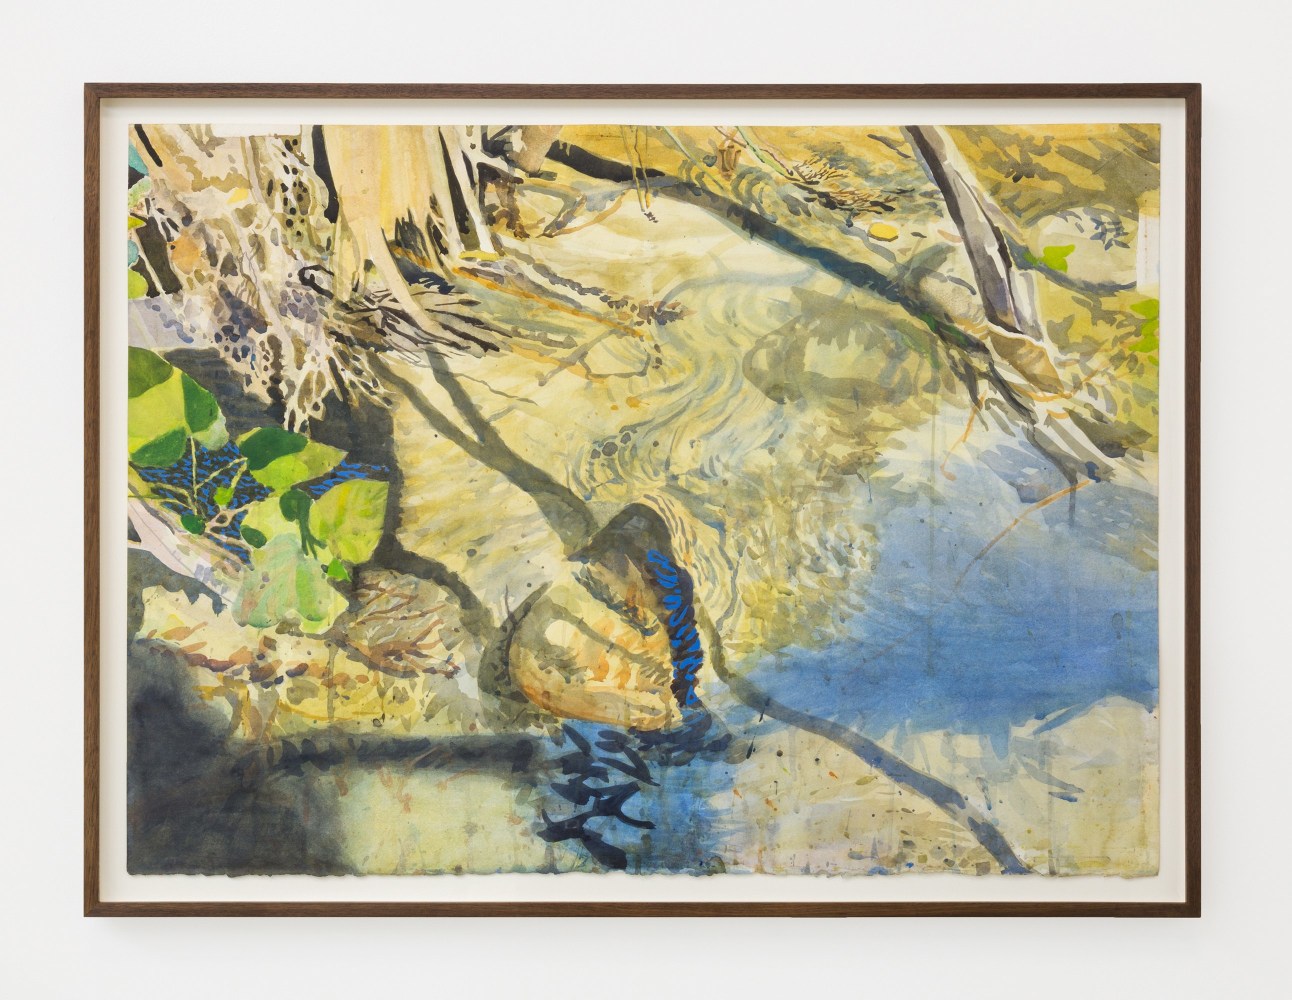 Sterling Wells
When light hits the water at 4:38PM (Arroyo Seco Site), 2020
25 1/4 x 34 1/2 in